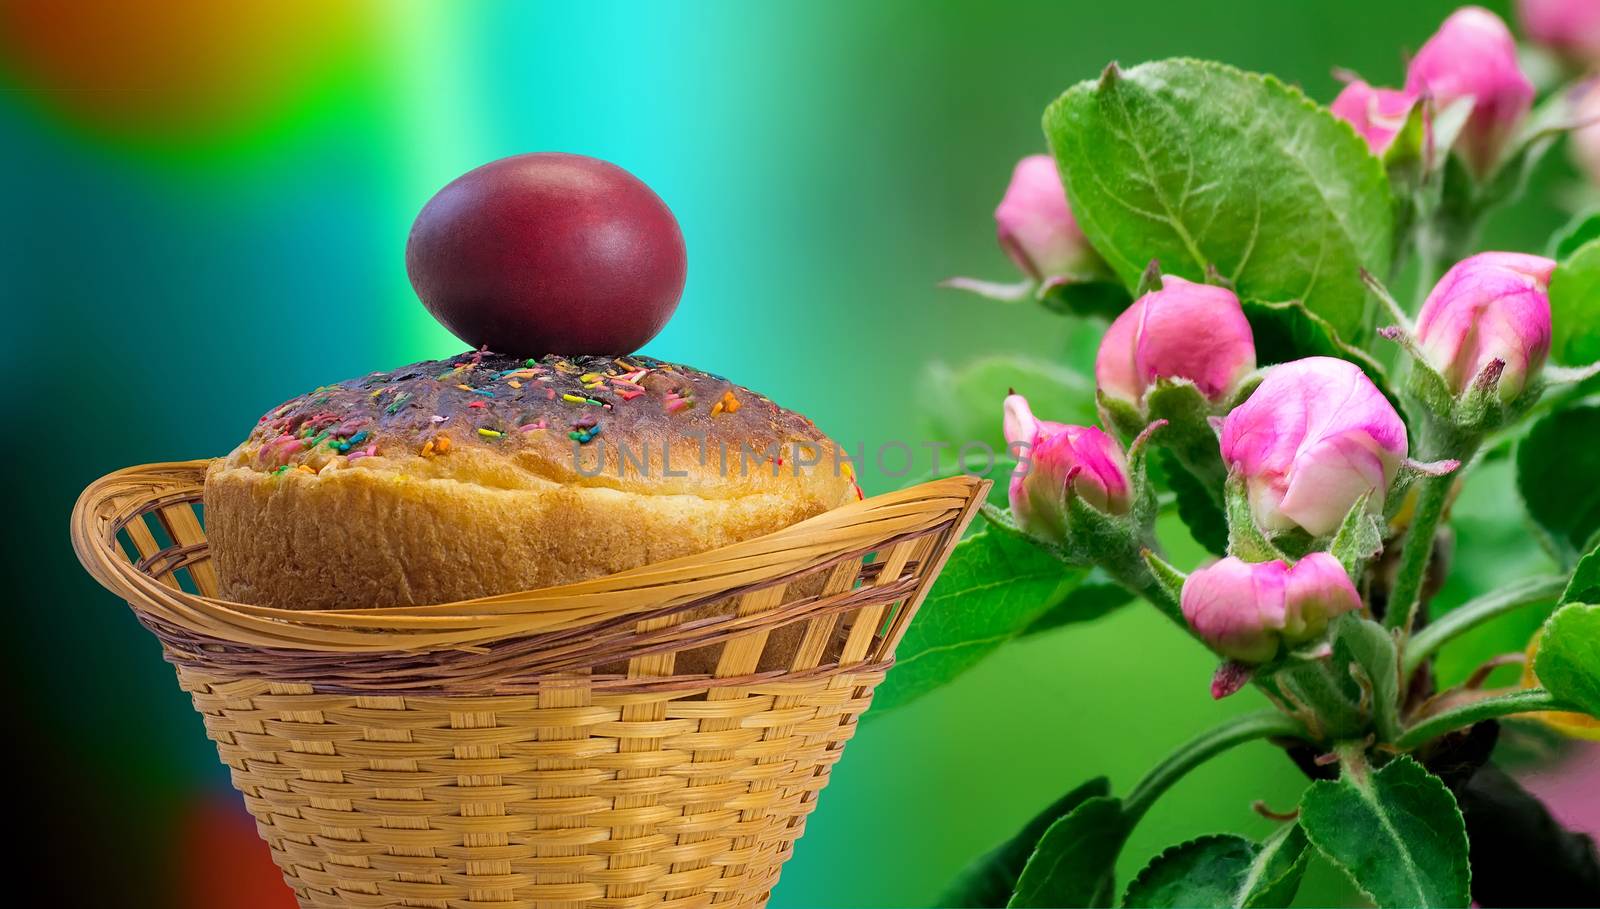 In a wicker basket next to the branch of Apple blossoms are Easter cake and red Easter egg .